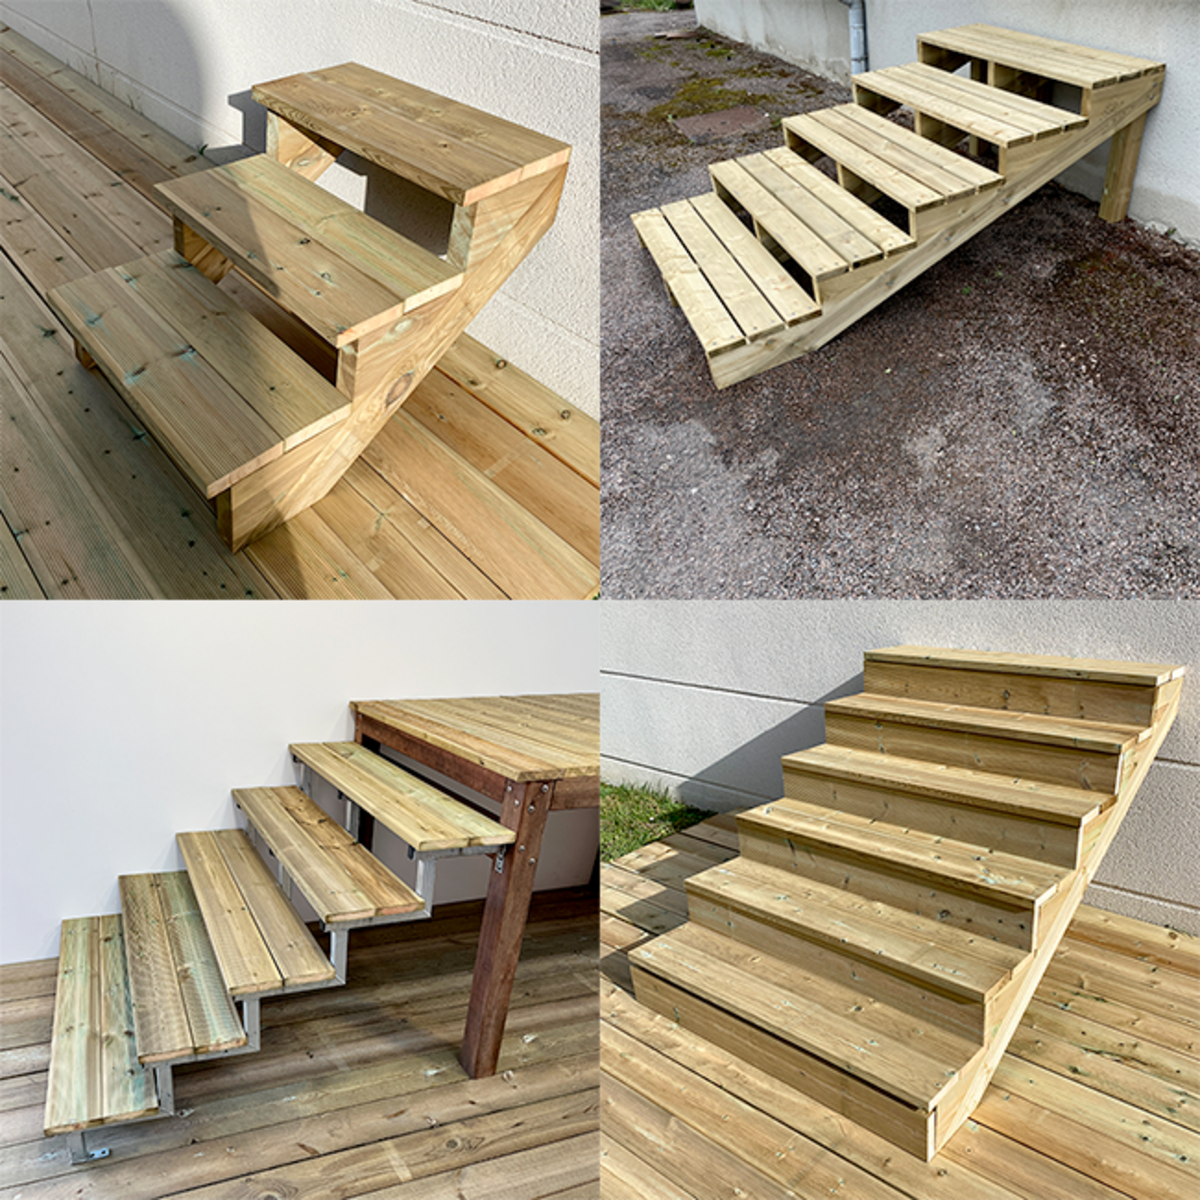 Deck stairs with galvanized steel stringers and hardwood steps